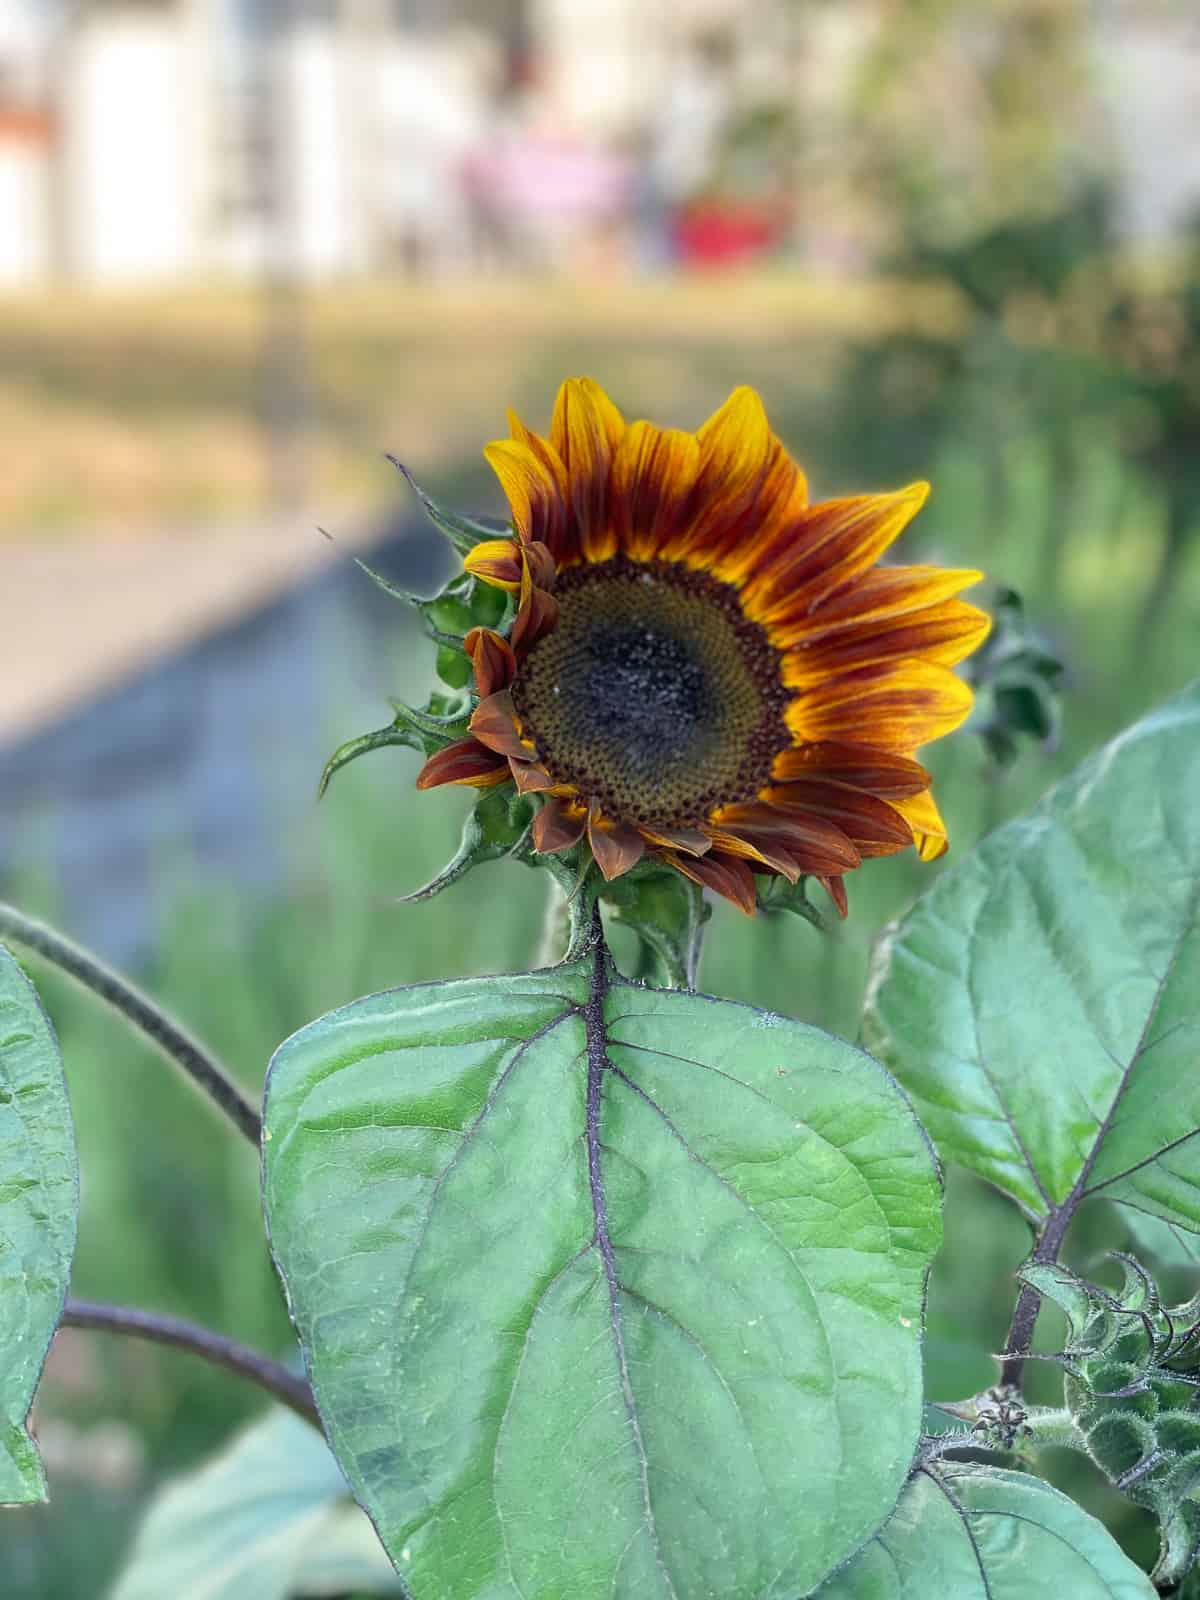 a yellow and orange sunflower.